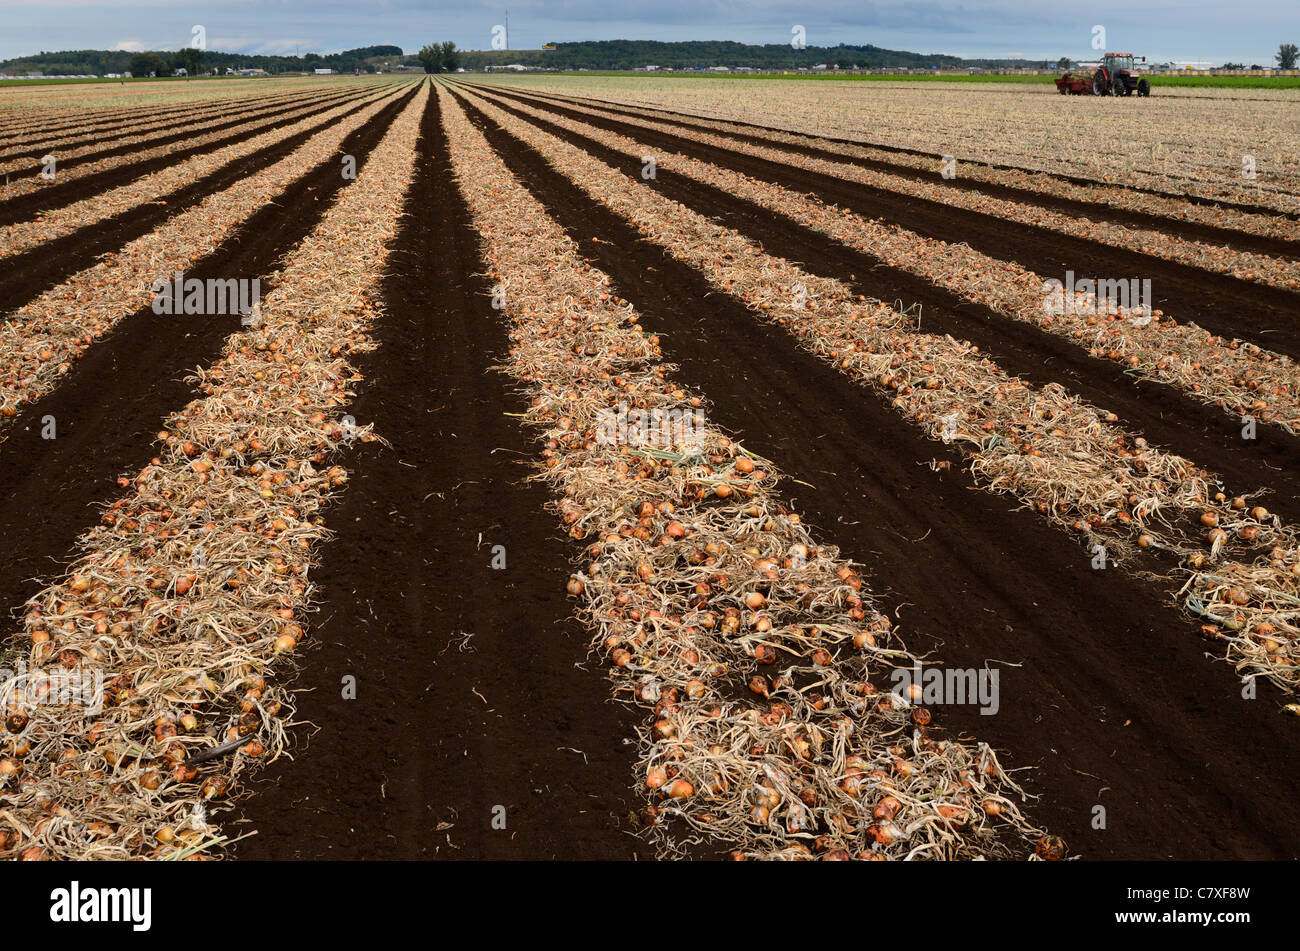 Rows of mature onions freshly pulled from the ground drying at a Holland Marsh farm agriculture food production Ontario Canada Stock Photo